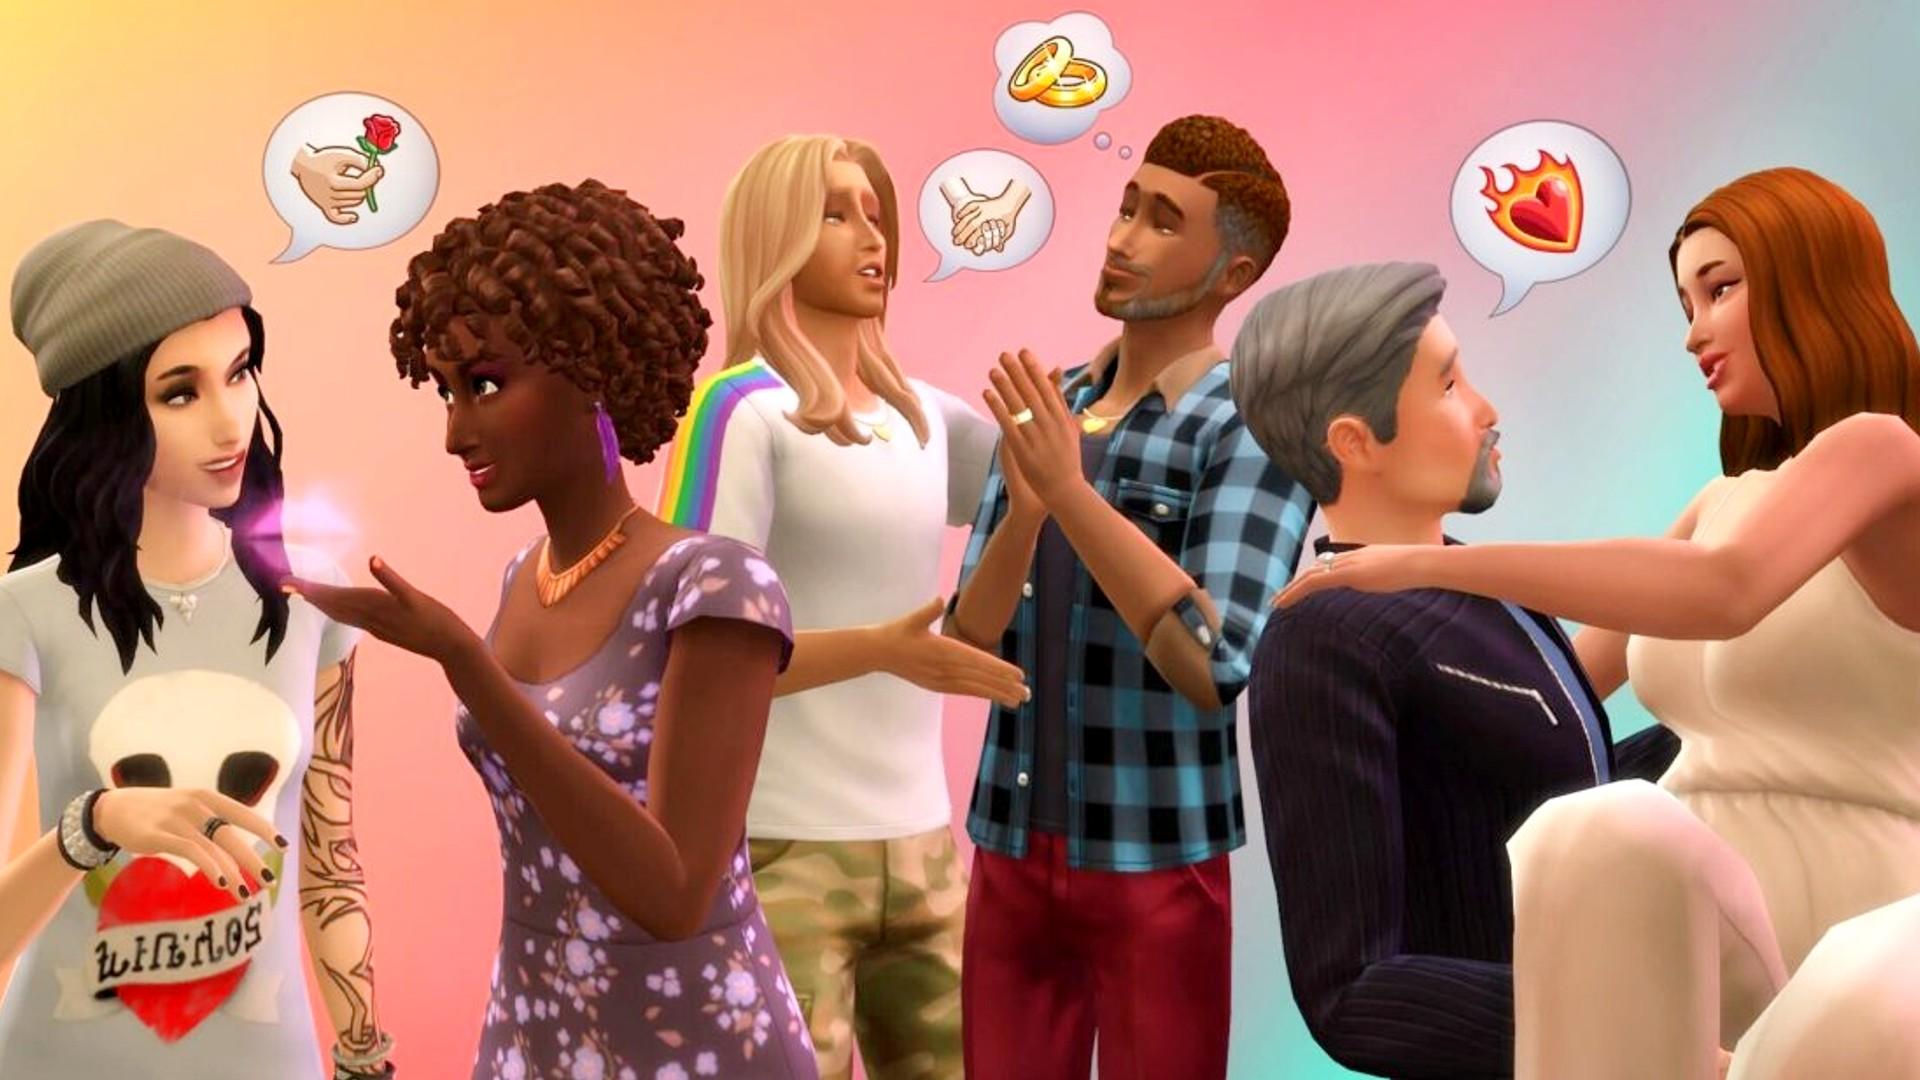 The Sims 4 Mods - CurseForge in 2023